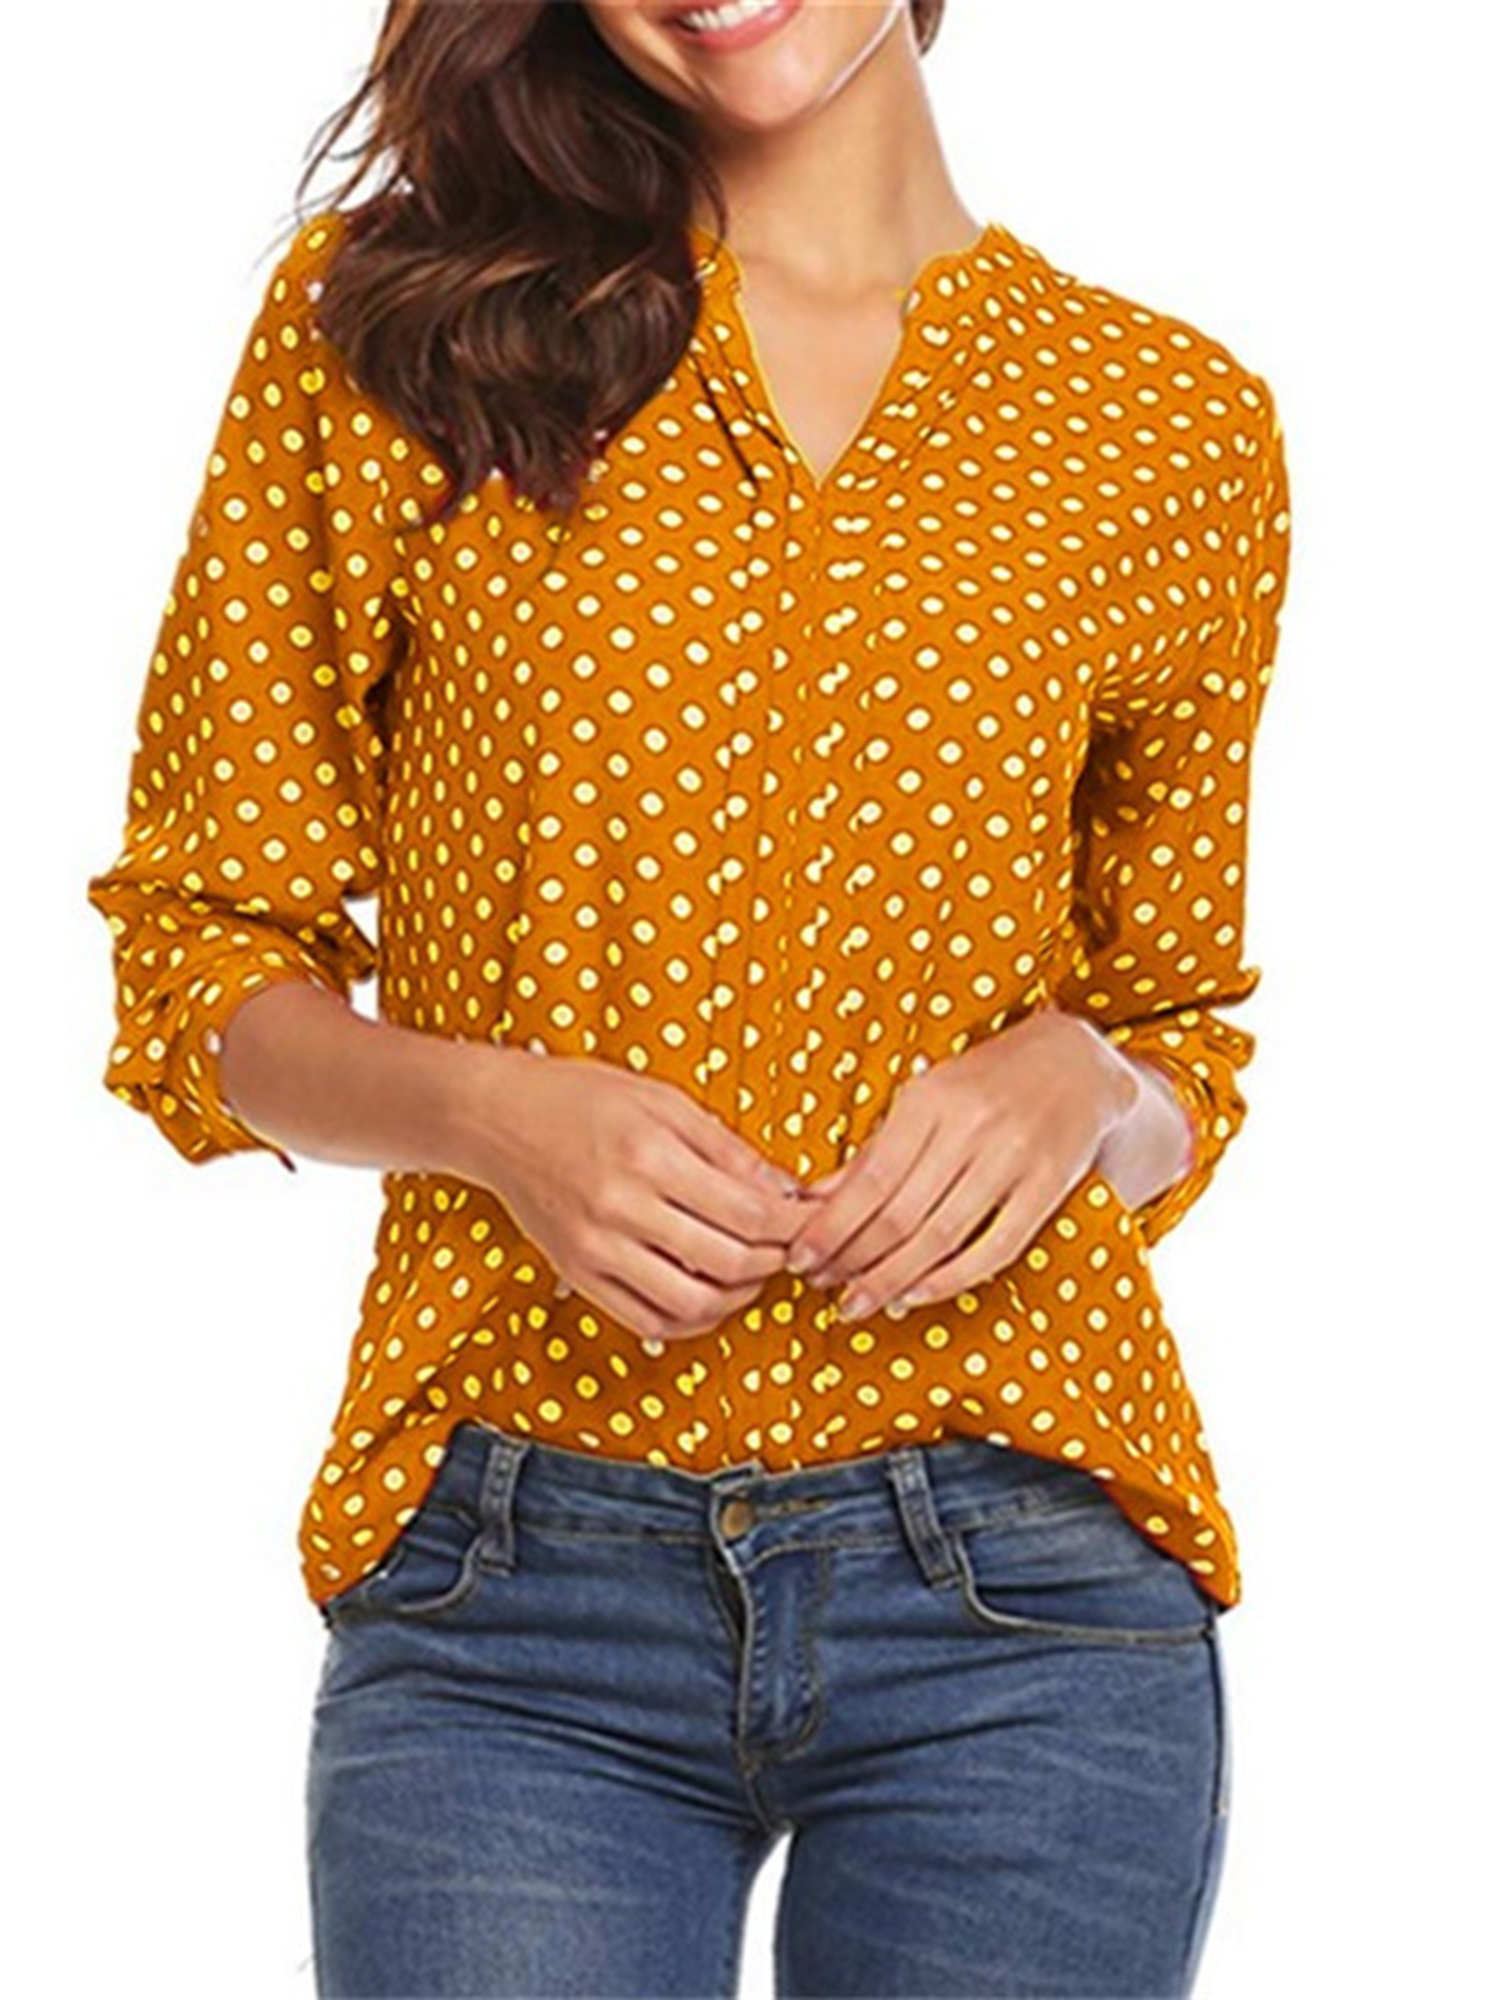 Plus Size Women's Roll Tab Sleeve Tunic Loose T-Shirts Split Neck Tops Polka Dots Printed Casual Tunic Long Sleeve Shirt Tops for Womens Ladies Juniors - image 1 of 2